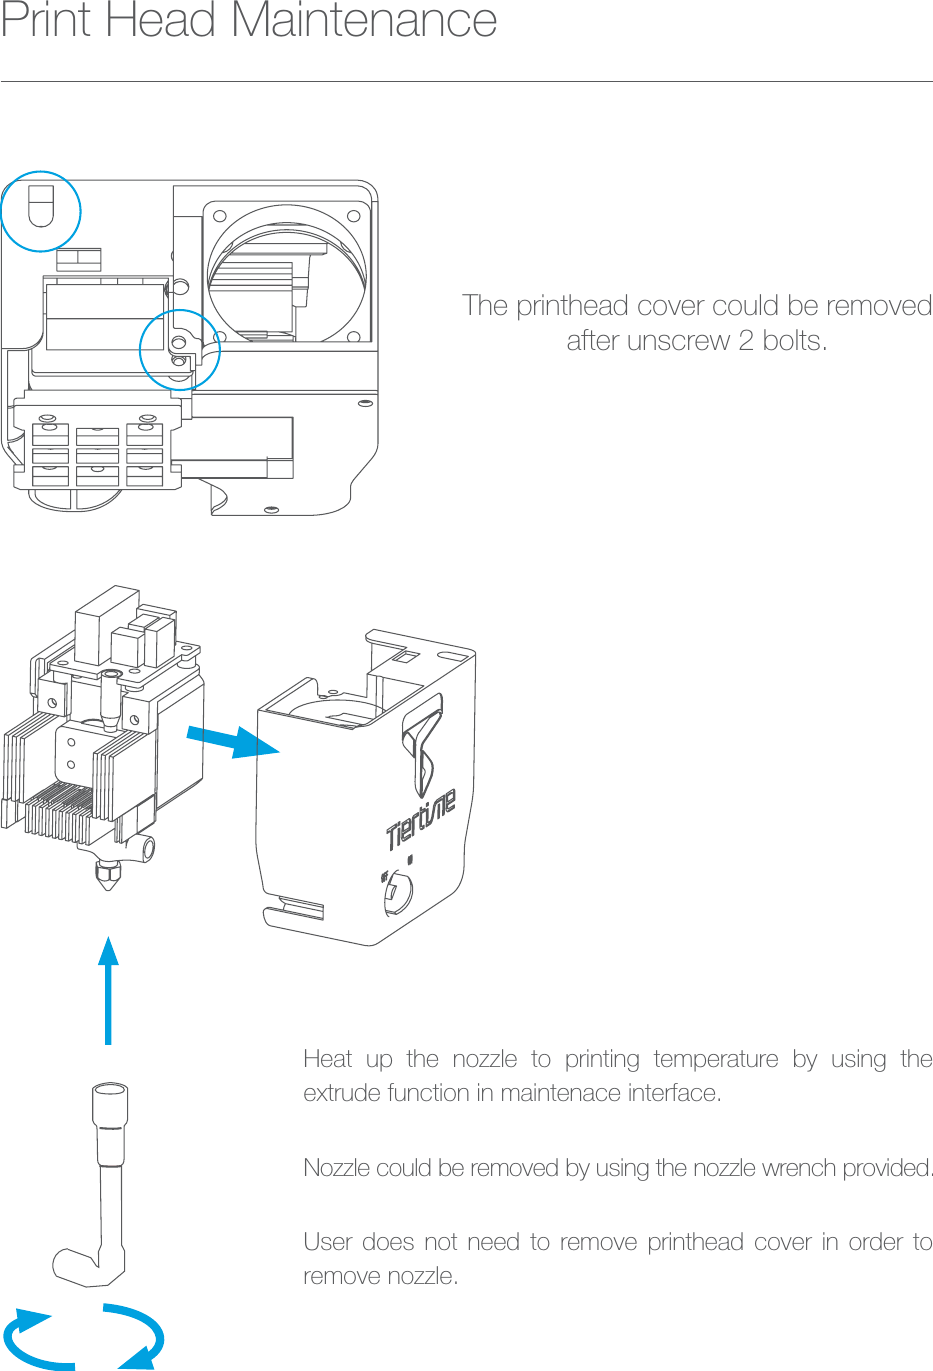 Heat up the nozzle to printing temperature by using the extrude function in maintenace interface.Nozzle could be removed by using the nozzle wrench provided.User does not need to remove printhead cover in order to remove nozzle.The printhead cover could be removedafter unscrew 2 bolts.Print Head Maintenance